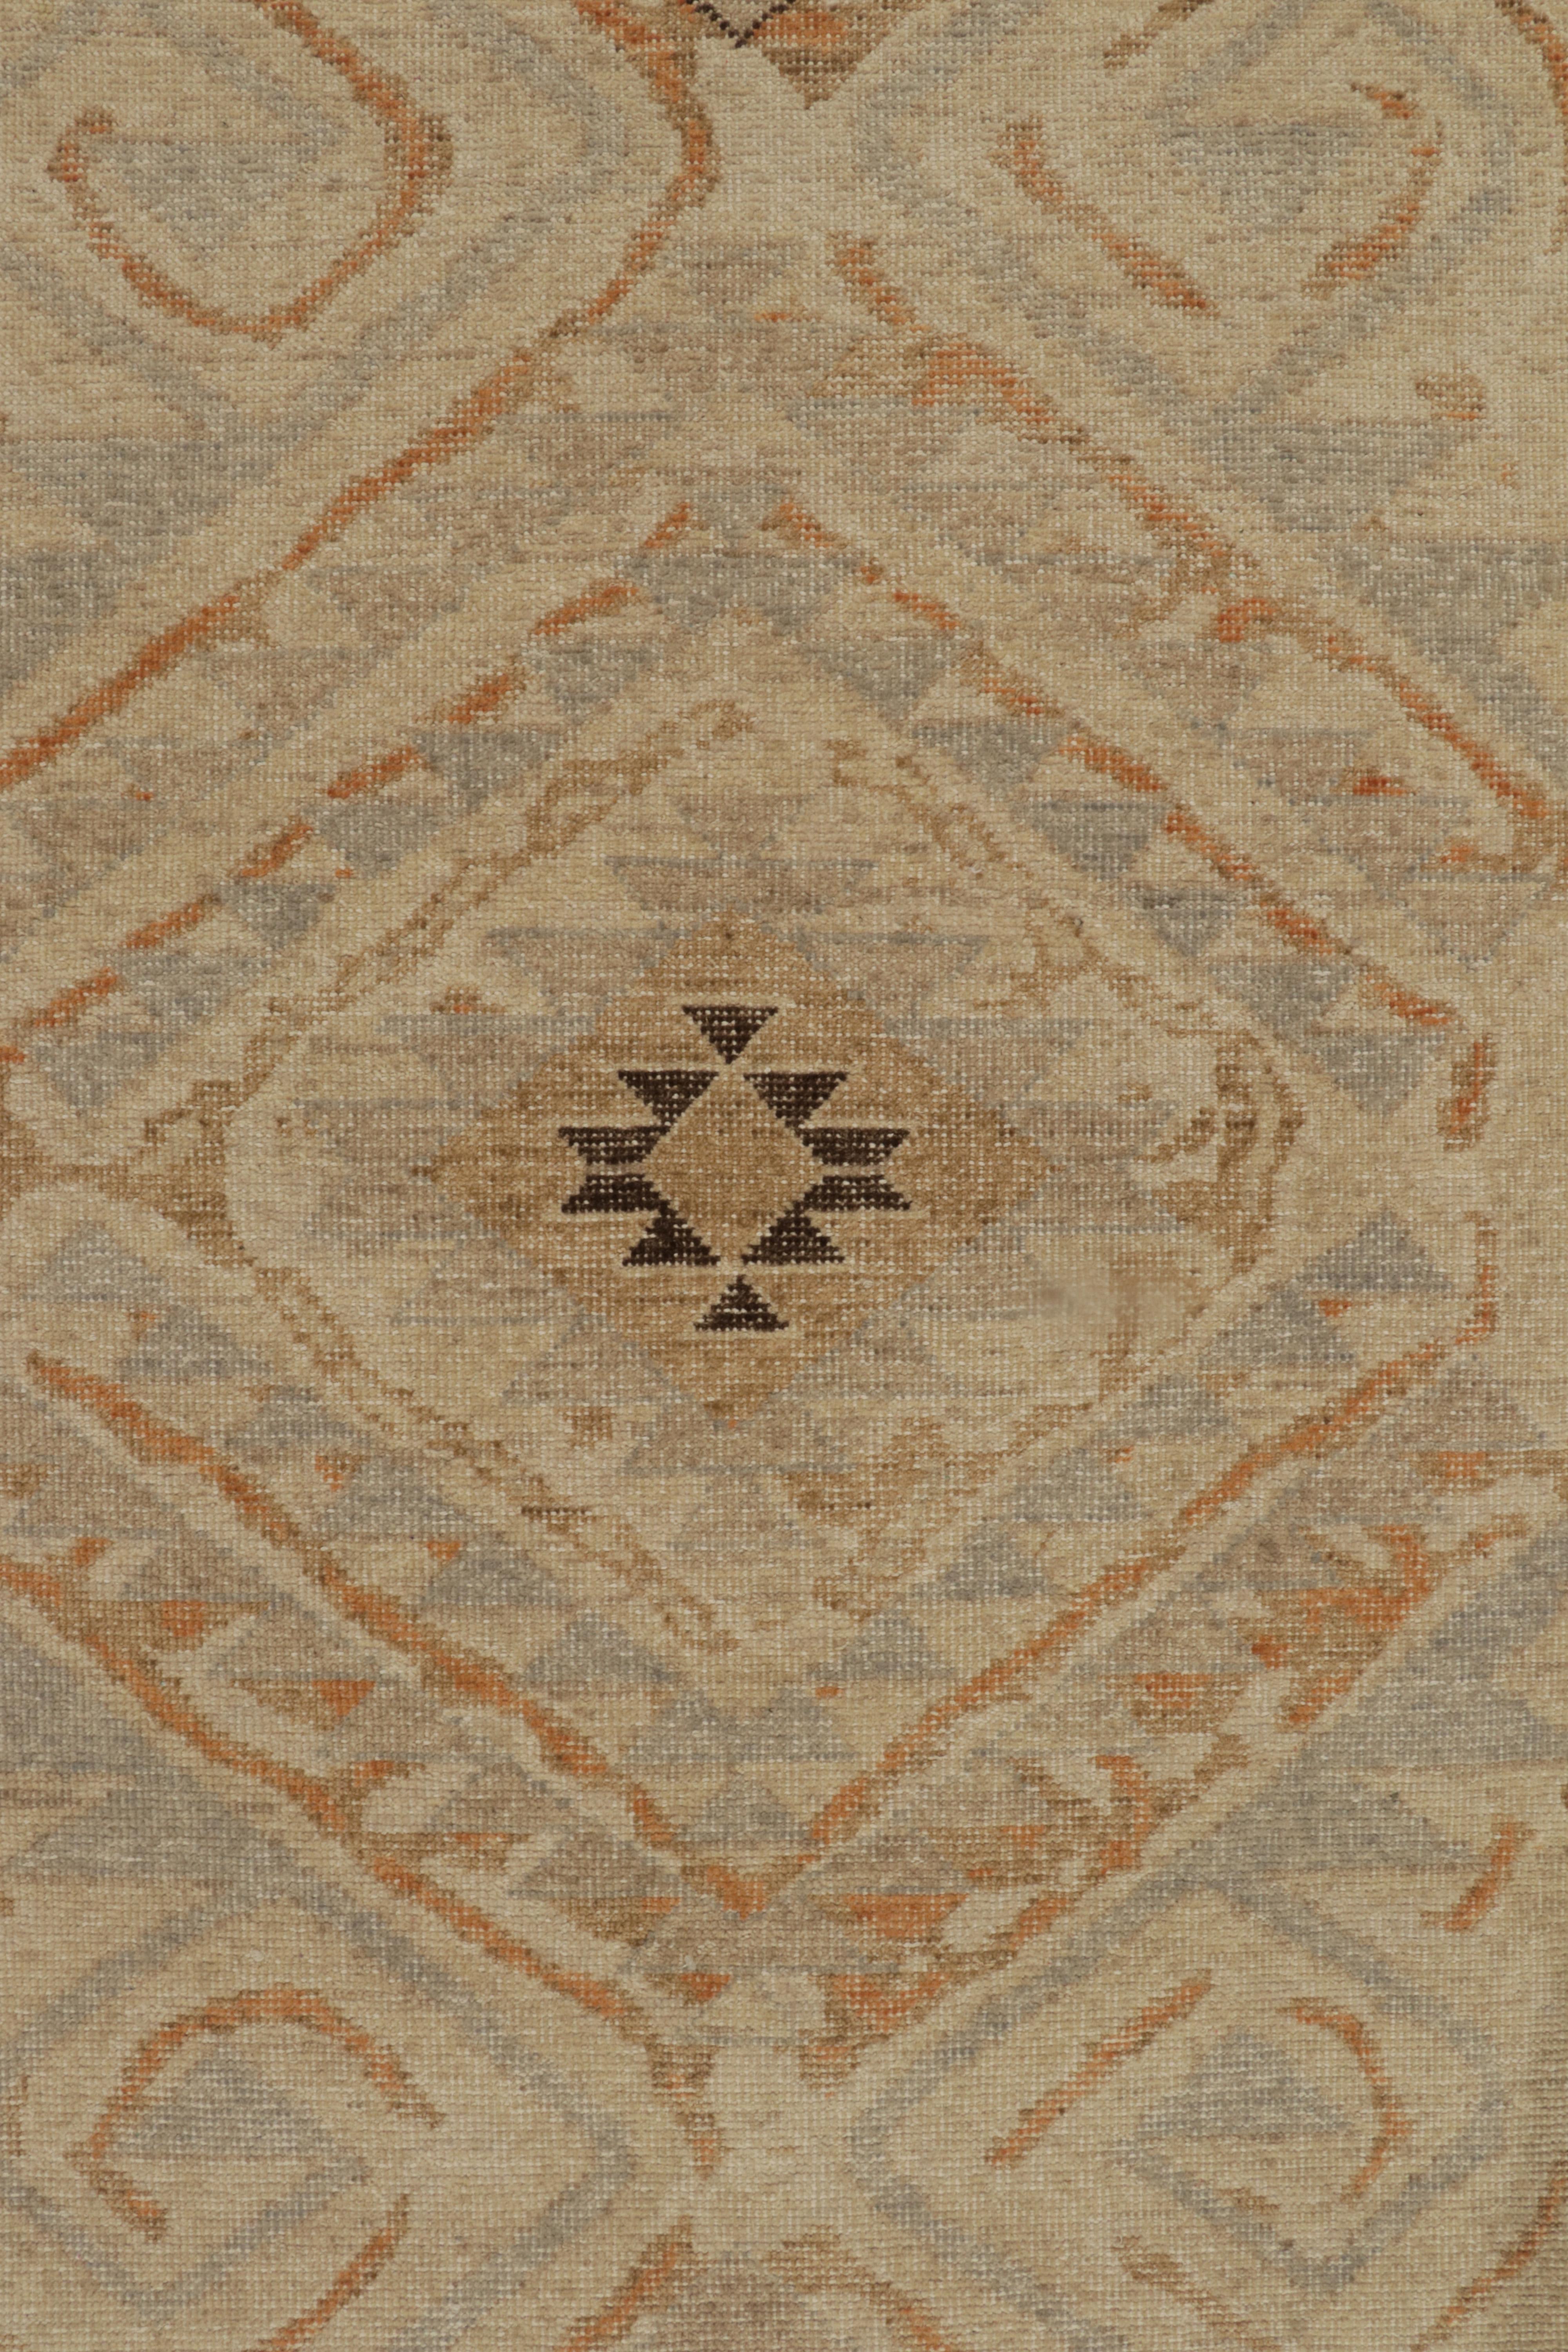 Rug & Kilim’s Distressed Style Rug in Beige-Brown, Blue & Rust Tribal Patterns In New Condition For Sale In Long Island City, NY